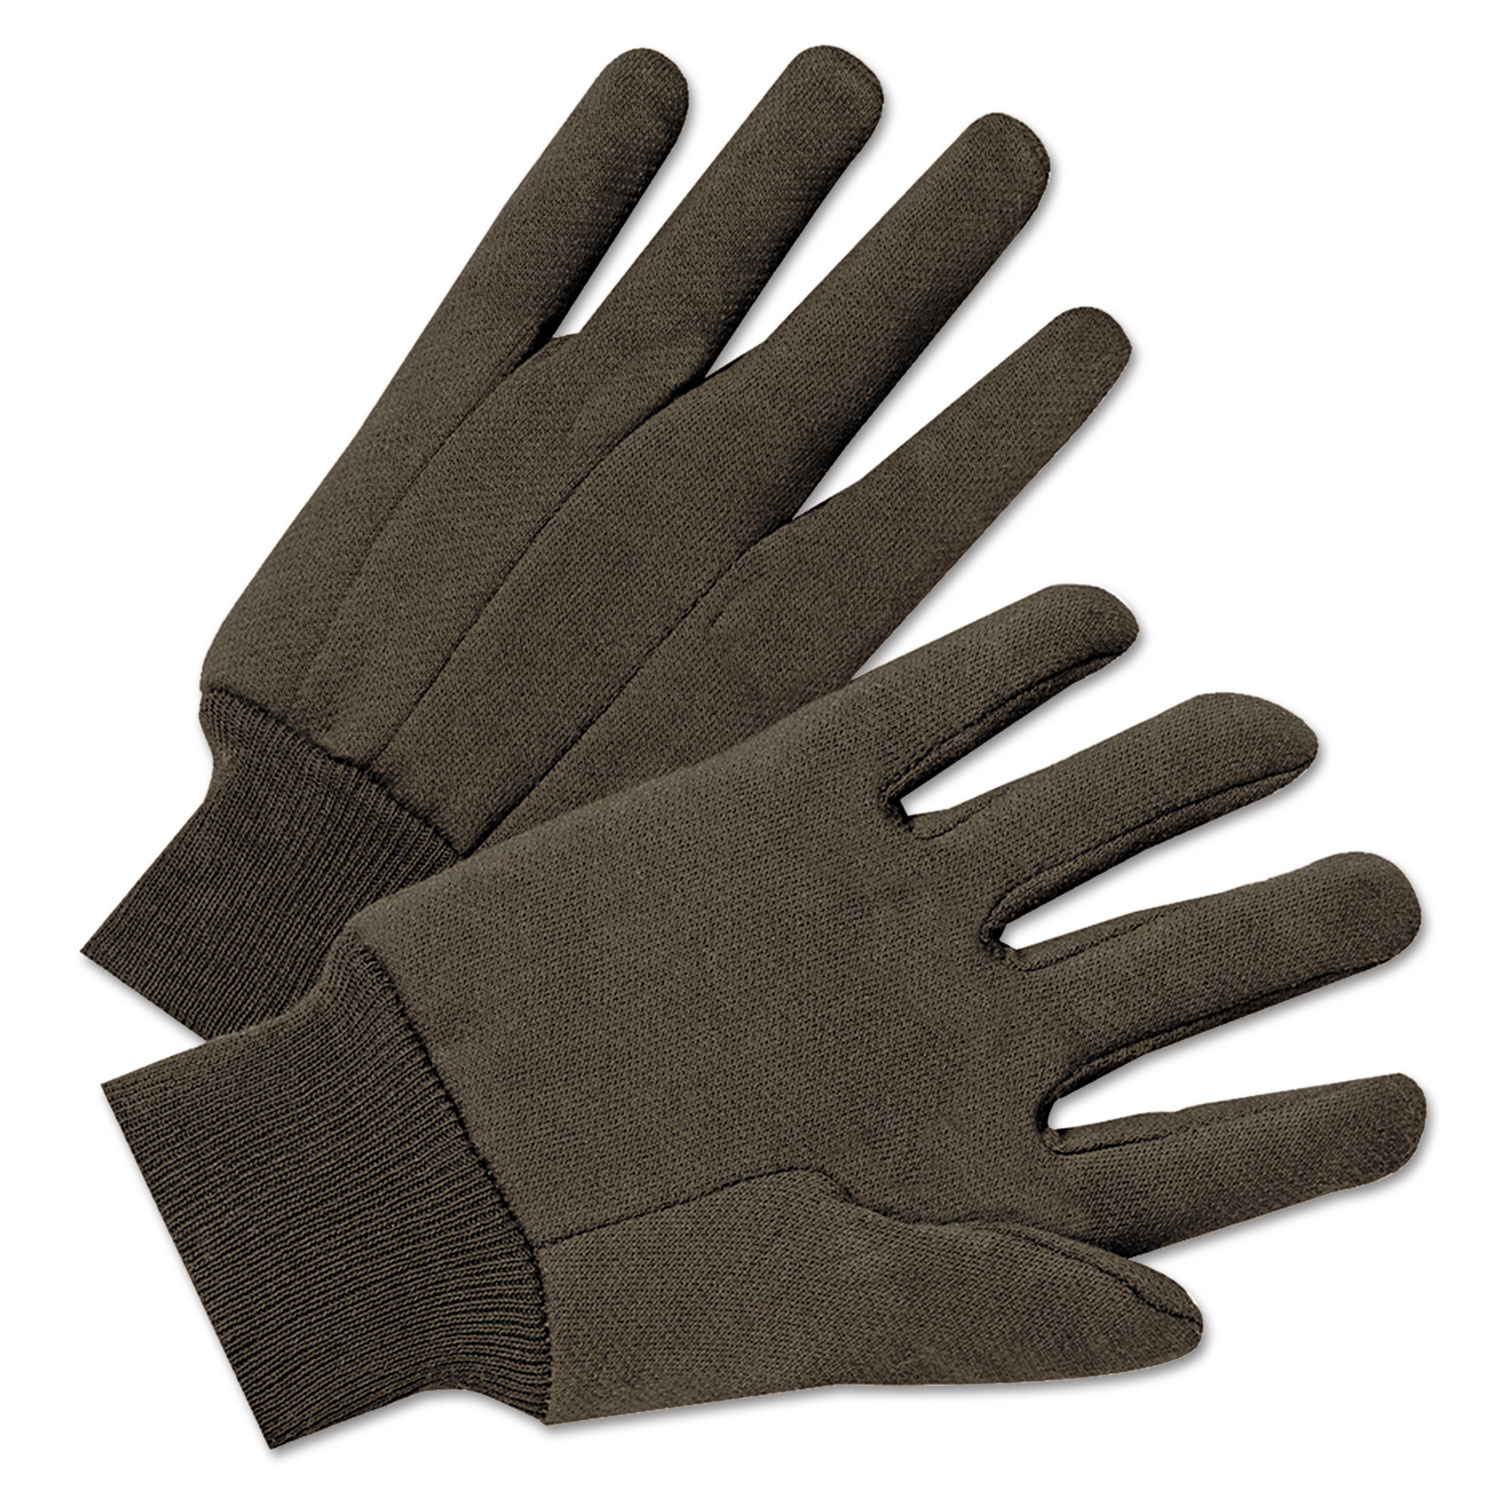  Anchor Brand 750 Jersey General Purpose Gloves, Brown, 12 Pairs (ANR1200) 